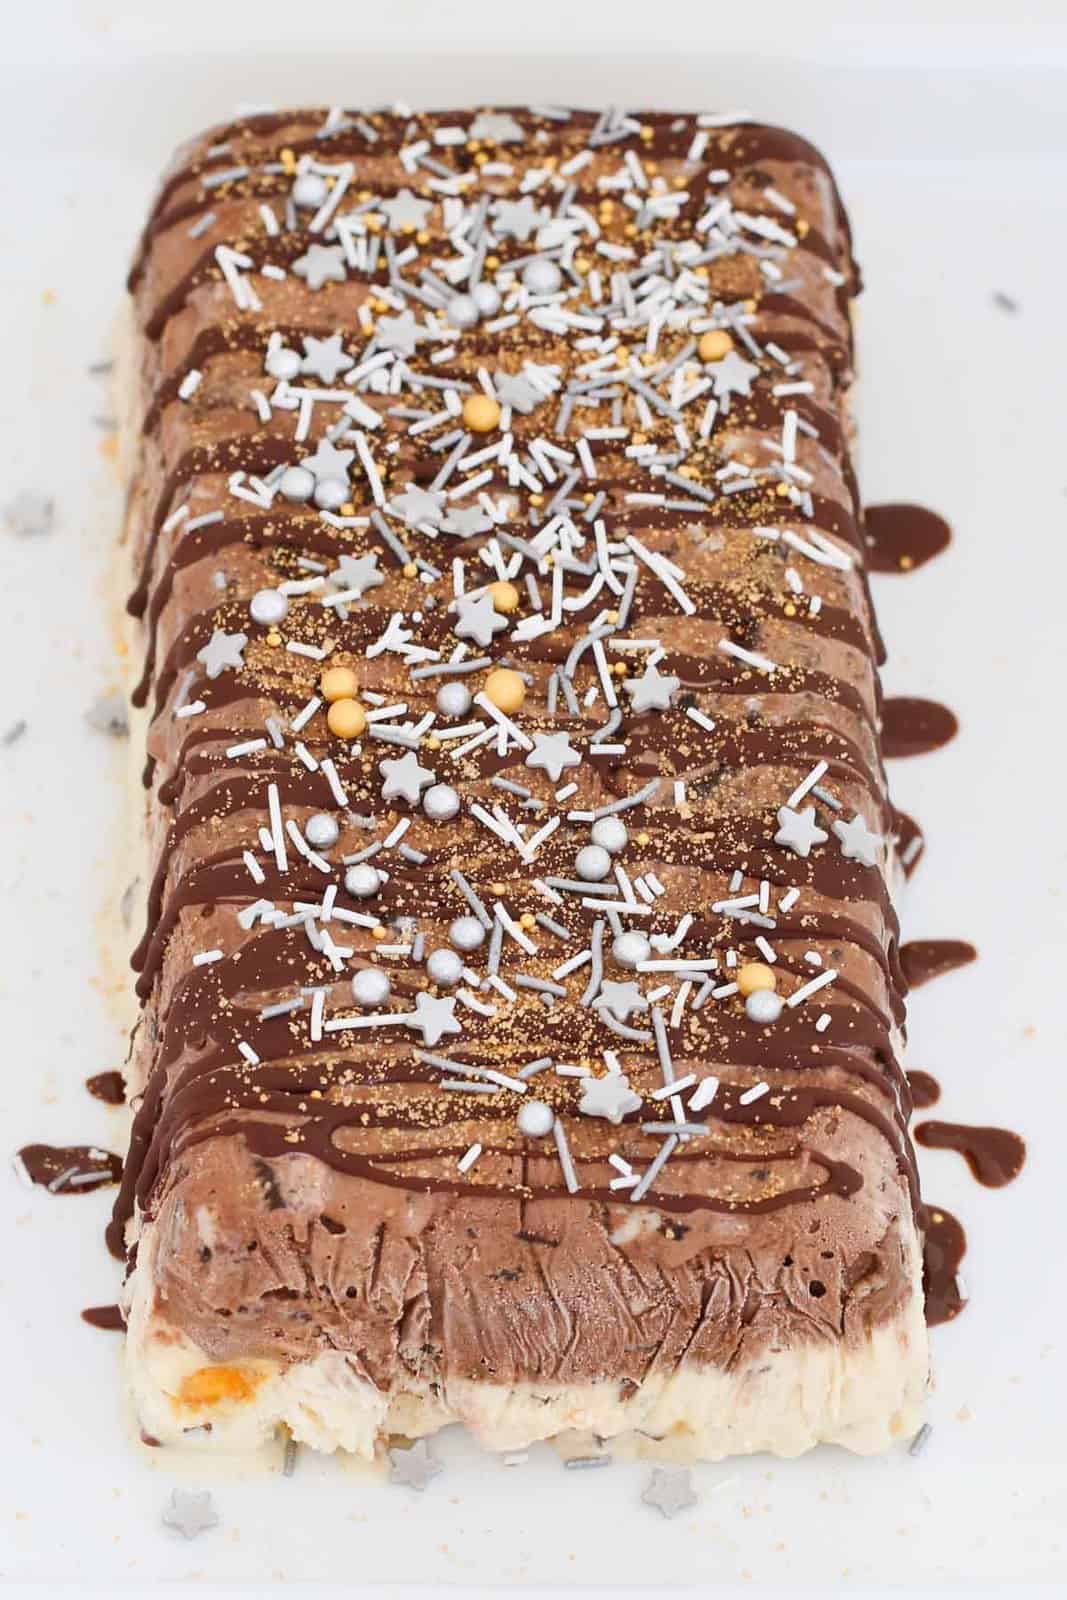 Gold and silver sprinkles and chocolate sauce over a chocolate and vanilla ice-cream cake.